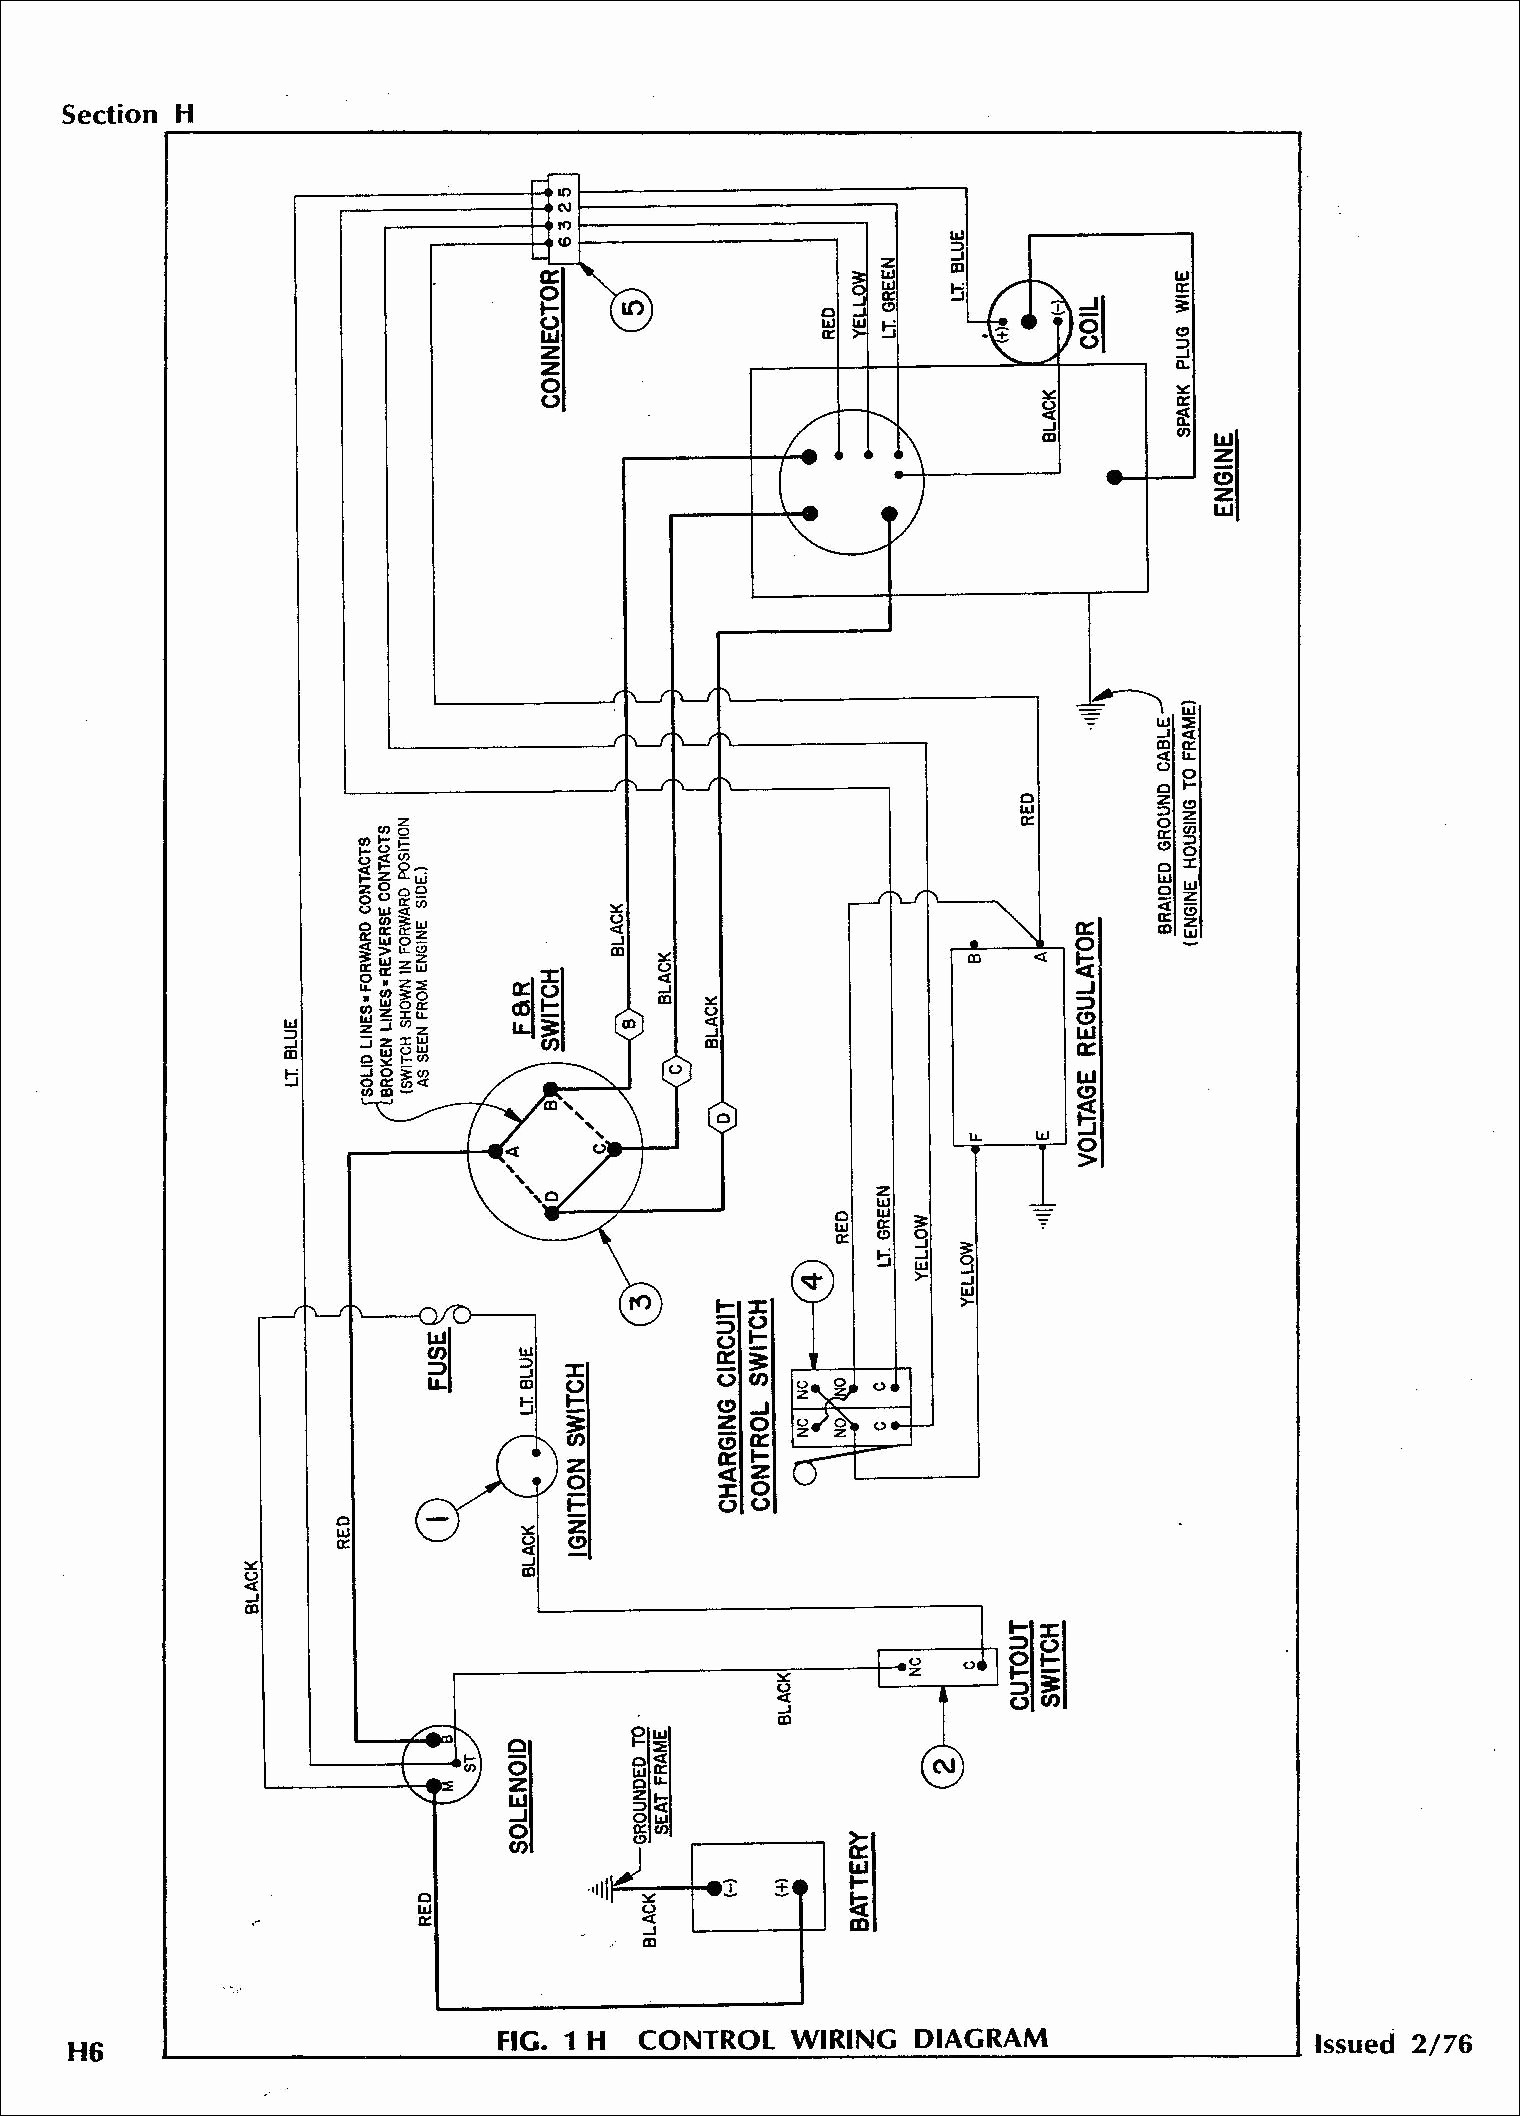 2005 Chevy S10 Exhaust Diagram Chevrolet Wiring Diagrams Instructions 2003 Chevrolet S10 Fog Light Wiring